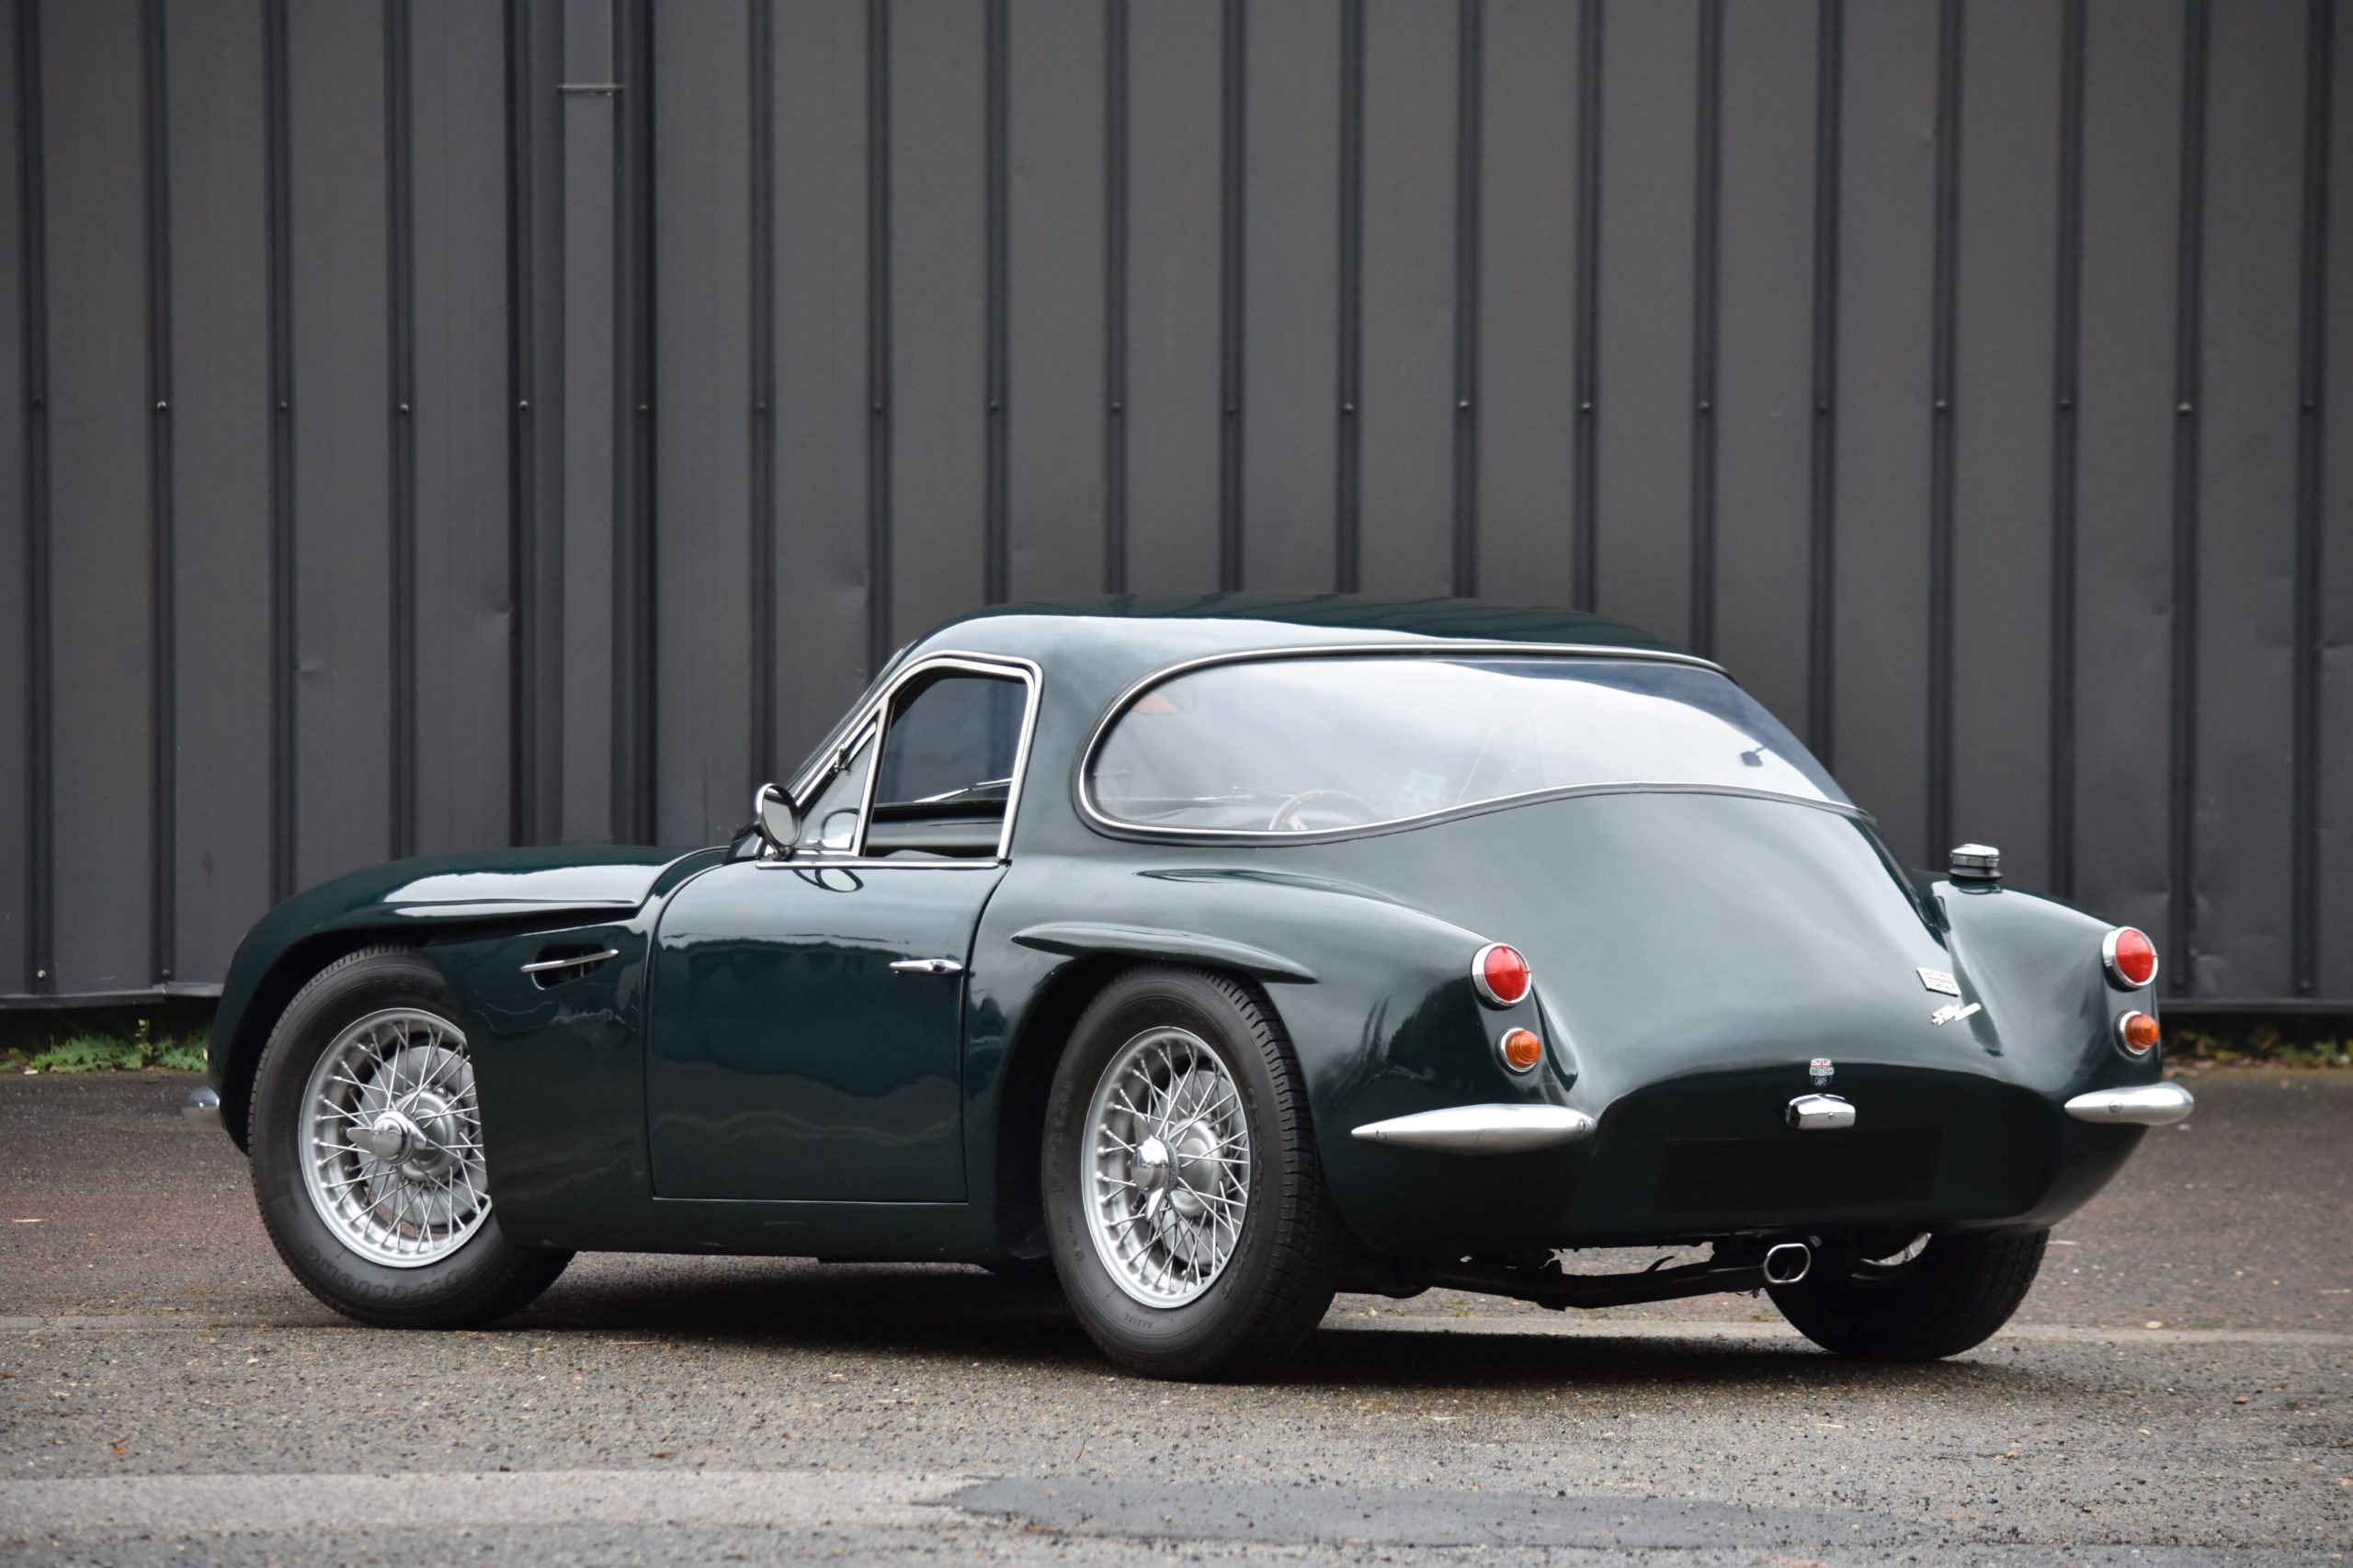 An Affordable Le Mans Classic Racer: The 1960s TVR Grantura